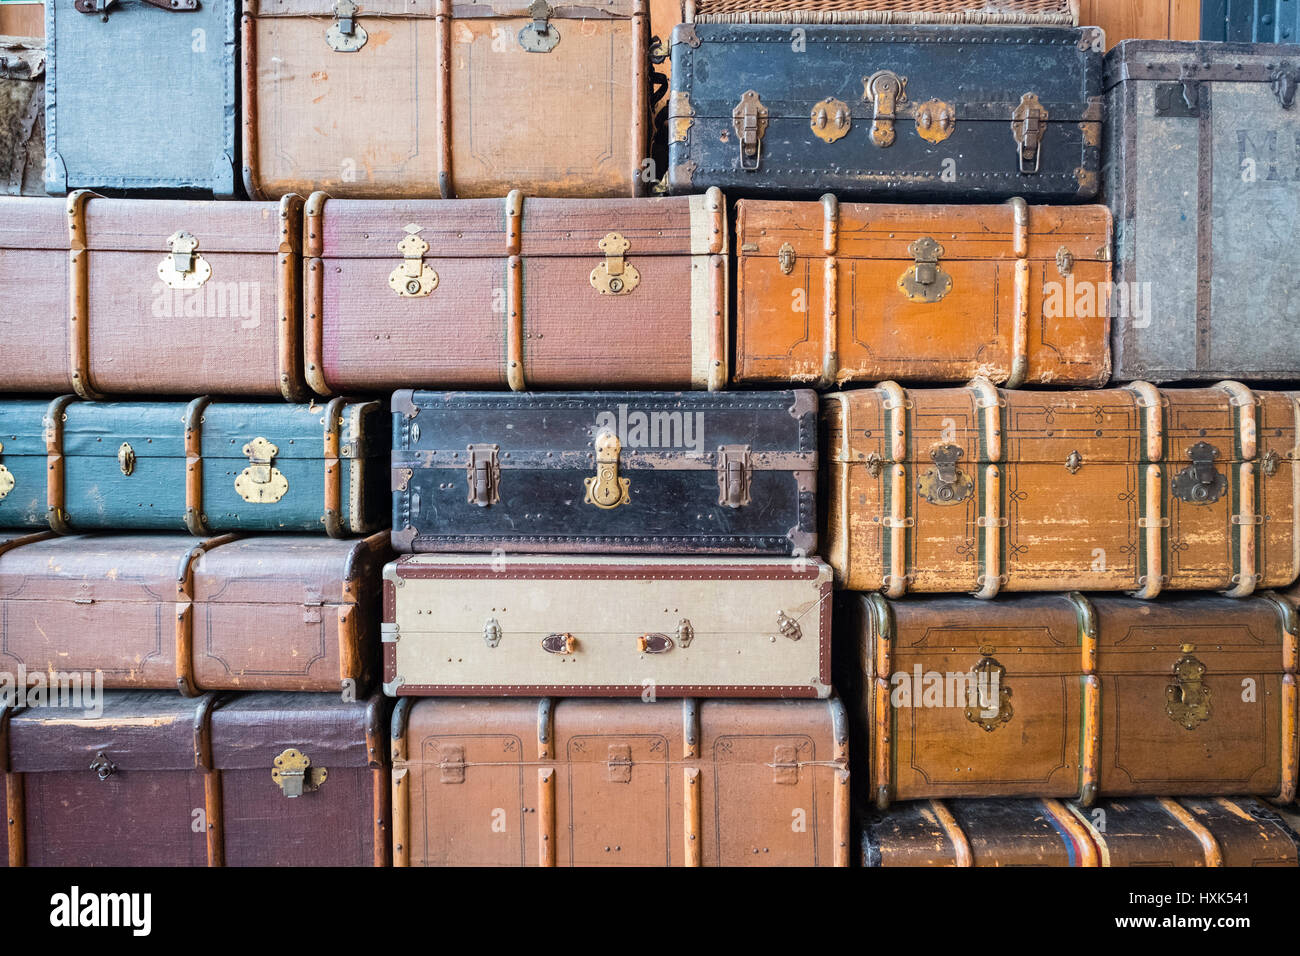 Many old suitcases stacked up Stock Photo